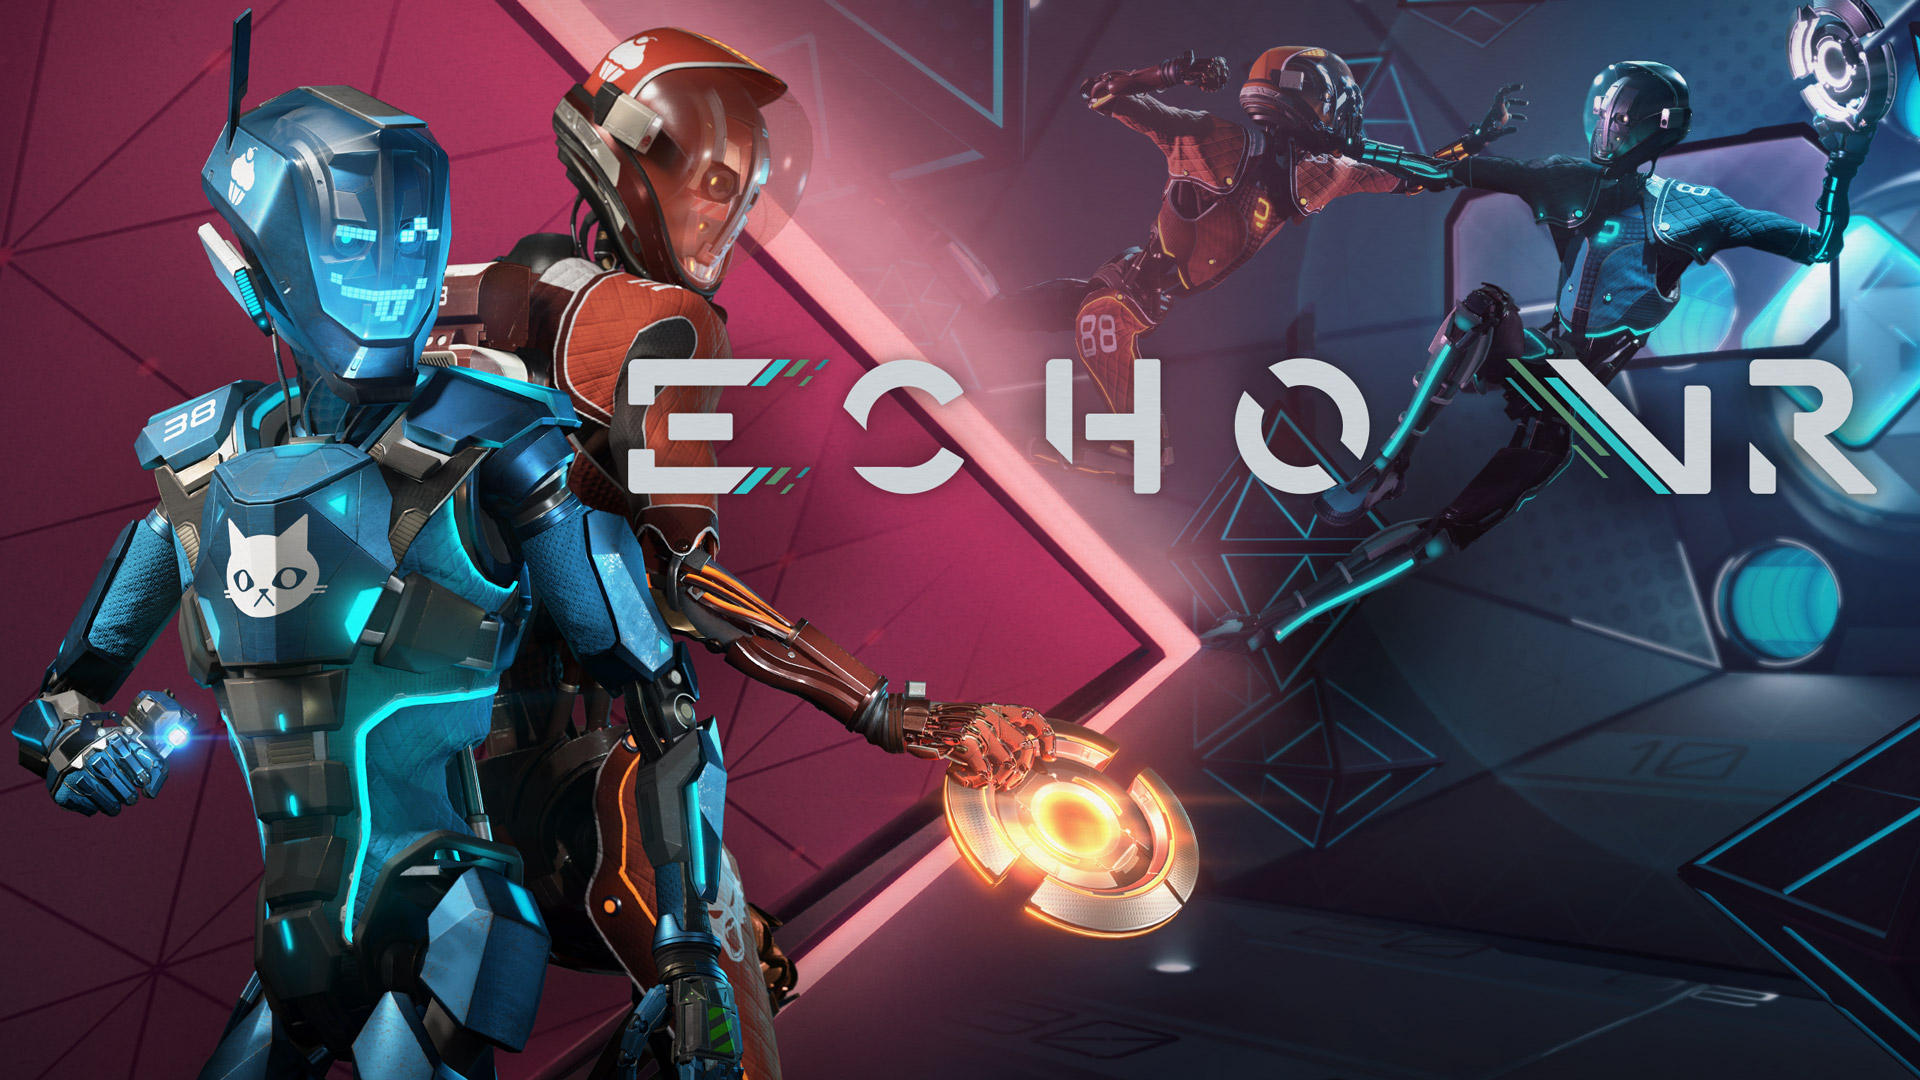 Meta Plans to Shut Down Echo VR, One of Quest’s Most Popular Multiplayer Games